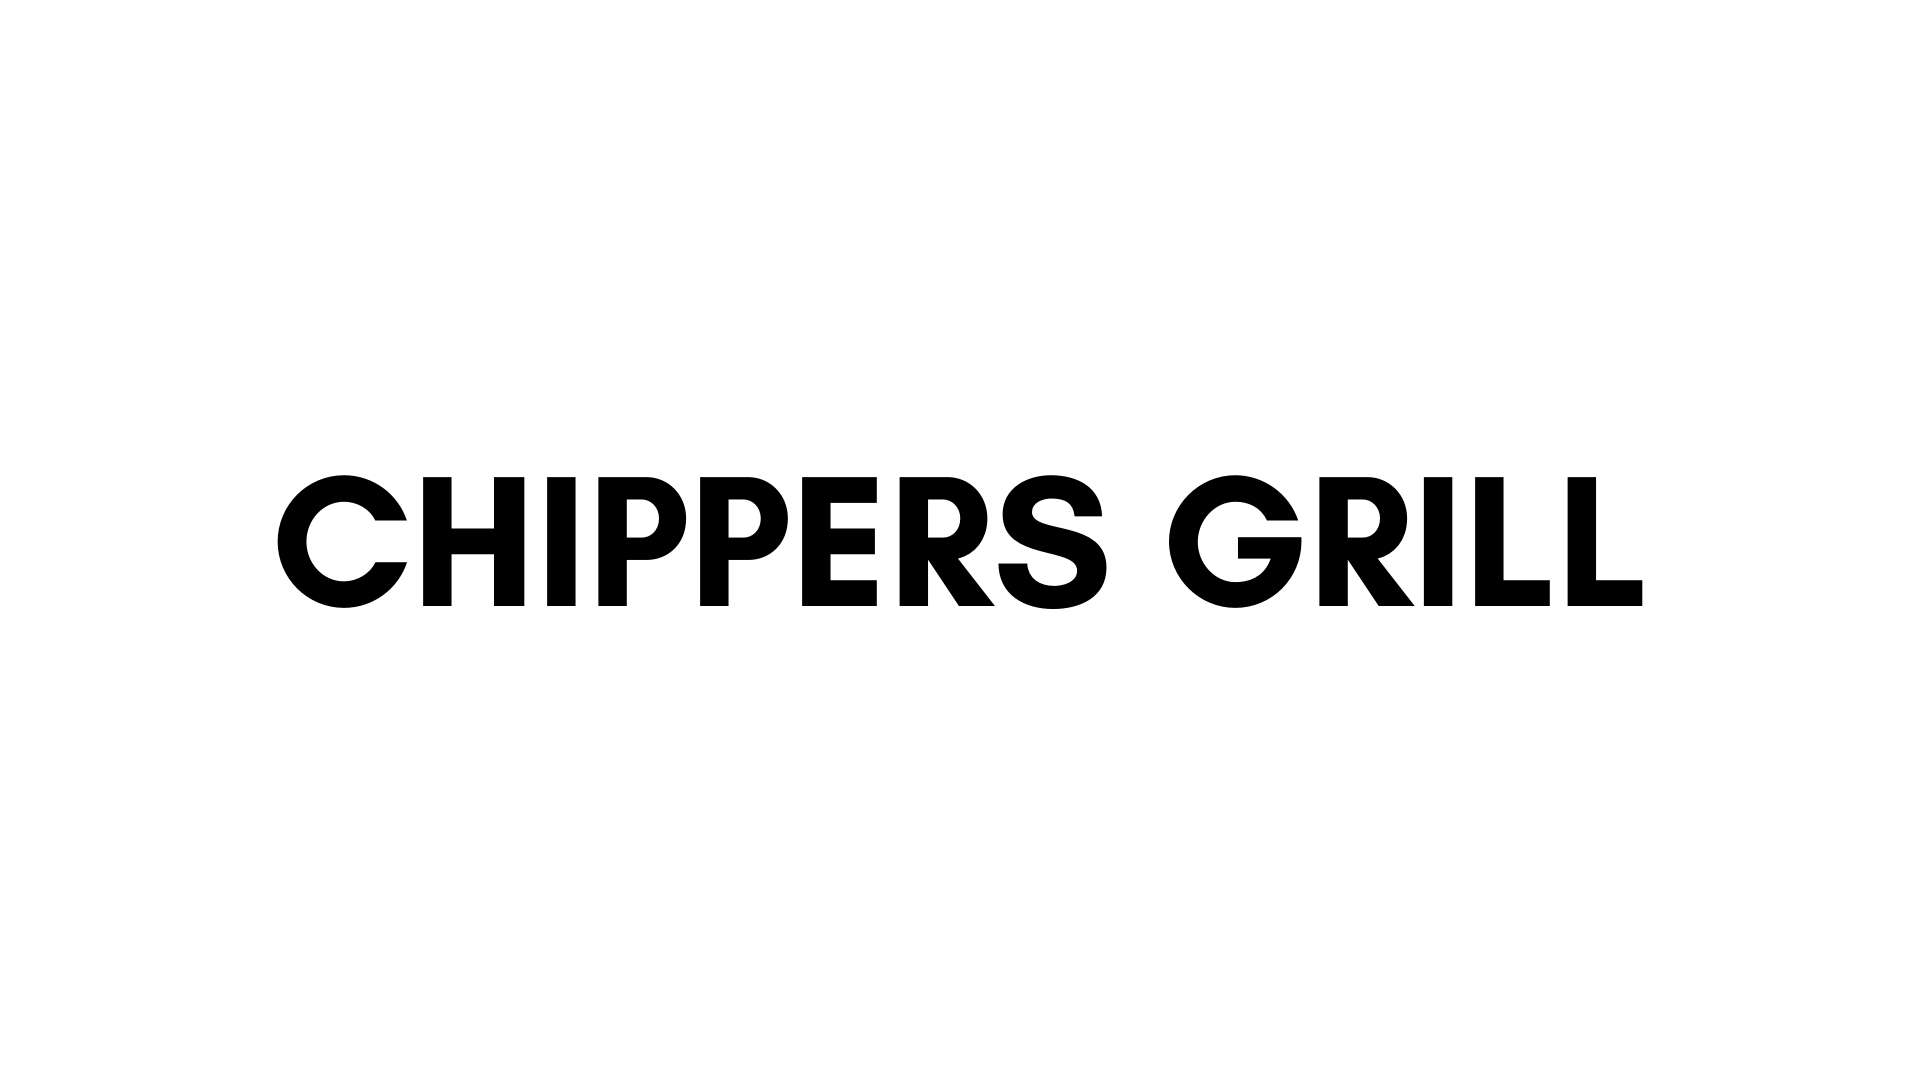 CHIPPERS GRILL